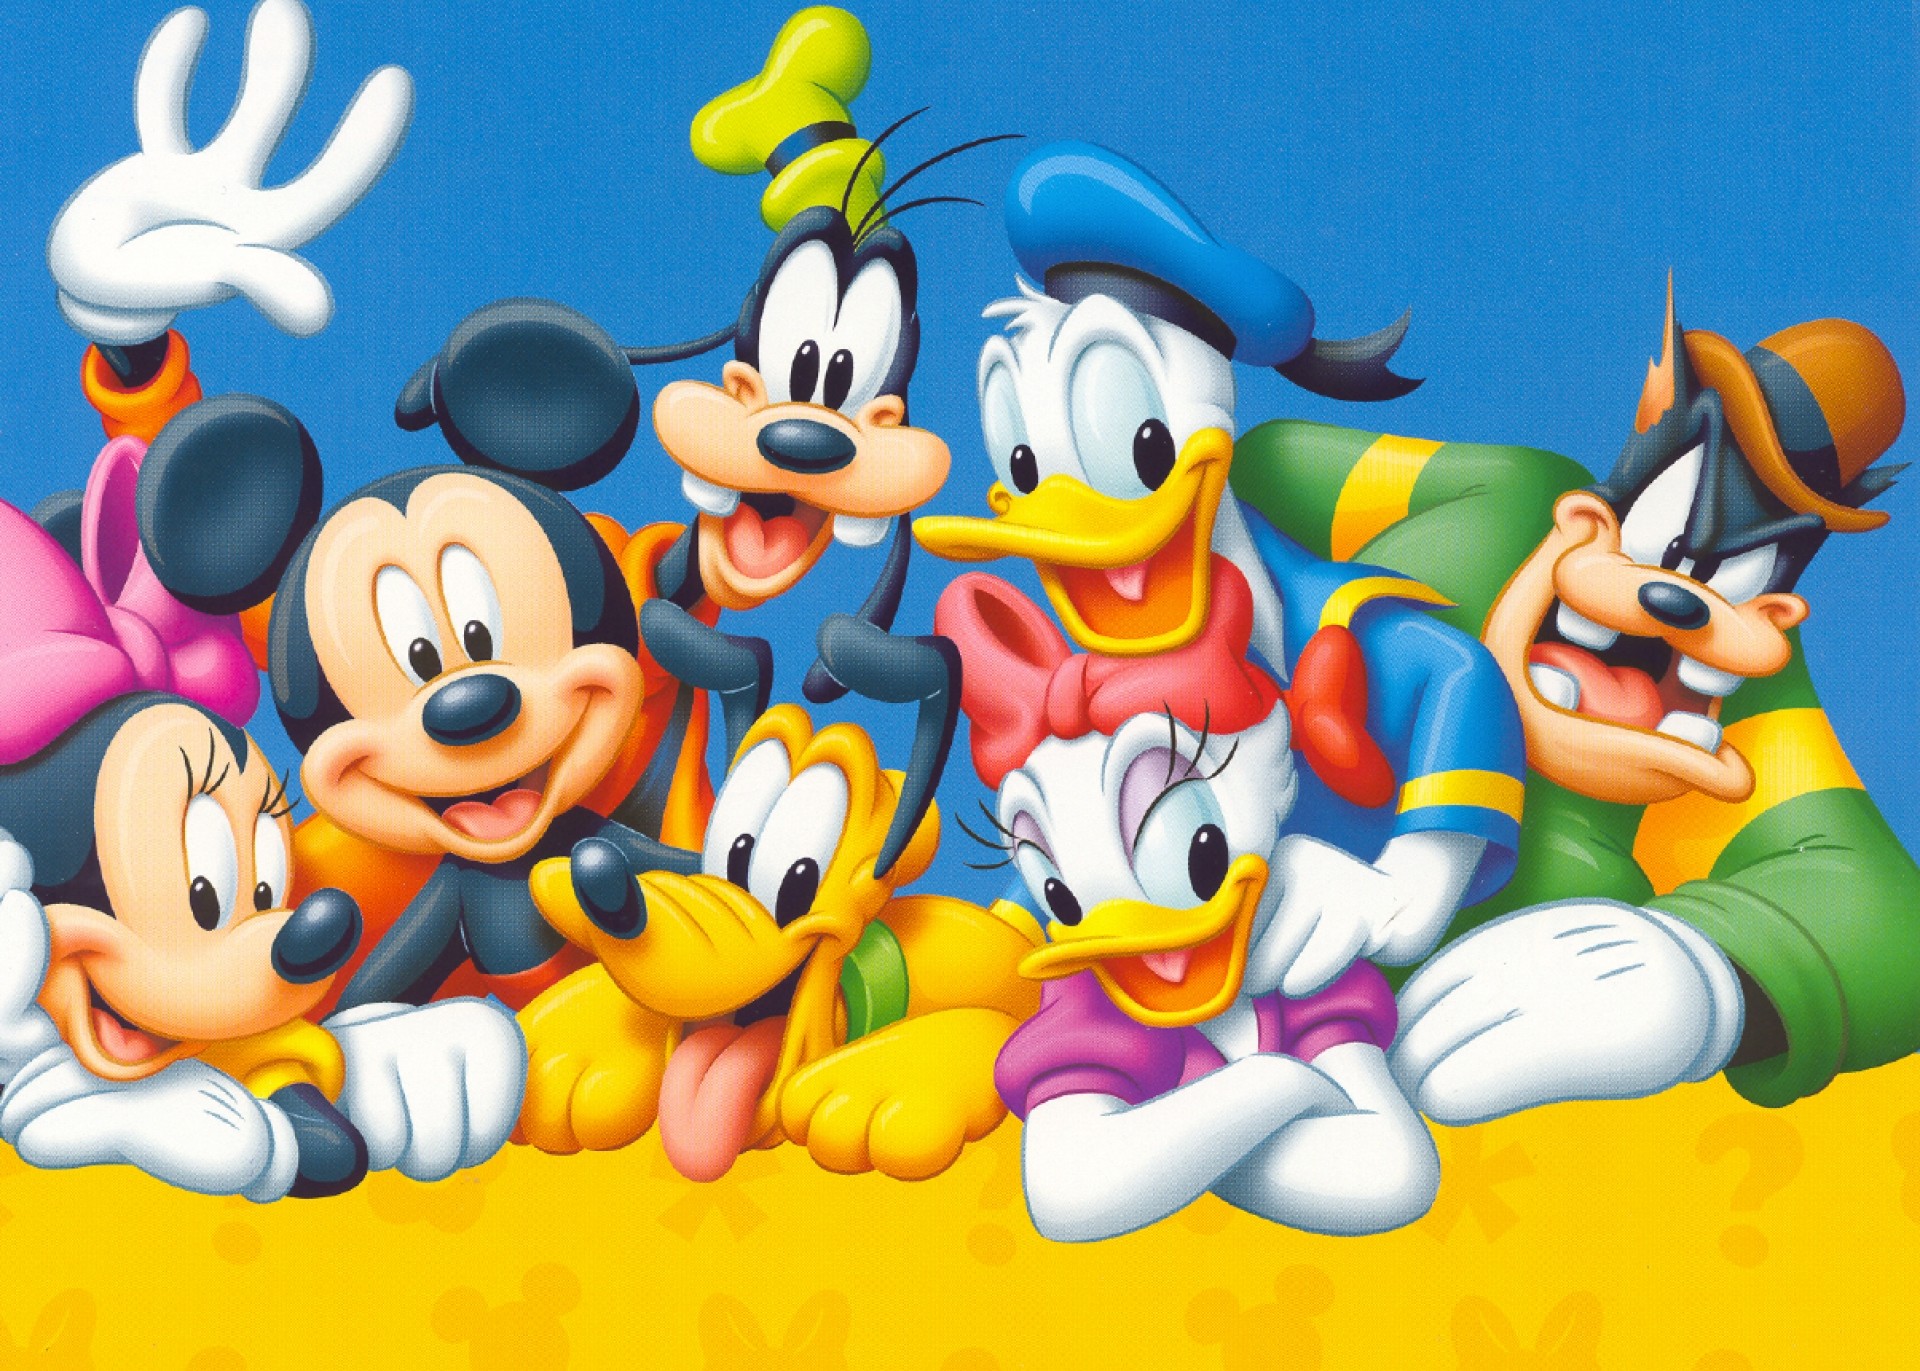 1920x1371 Search Results for “disney characters wallpapers hd” – Adorable Wallpapers